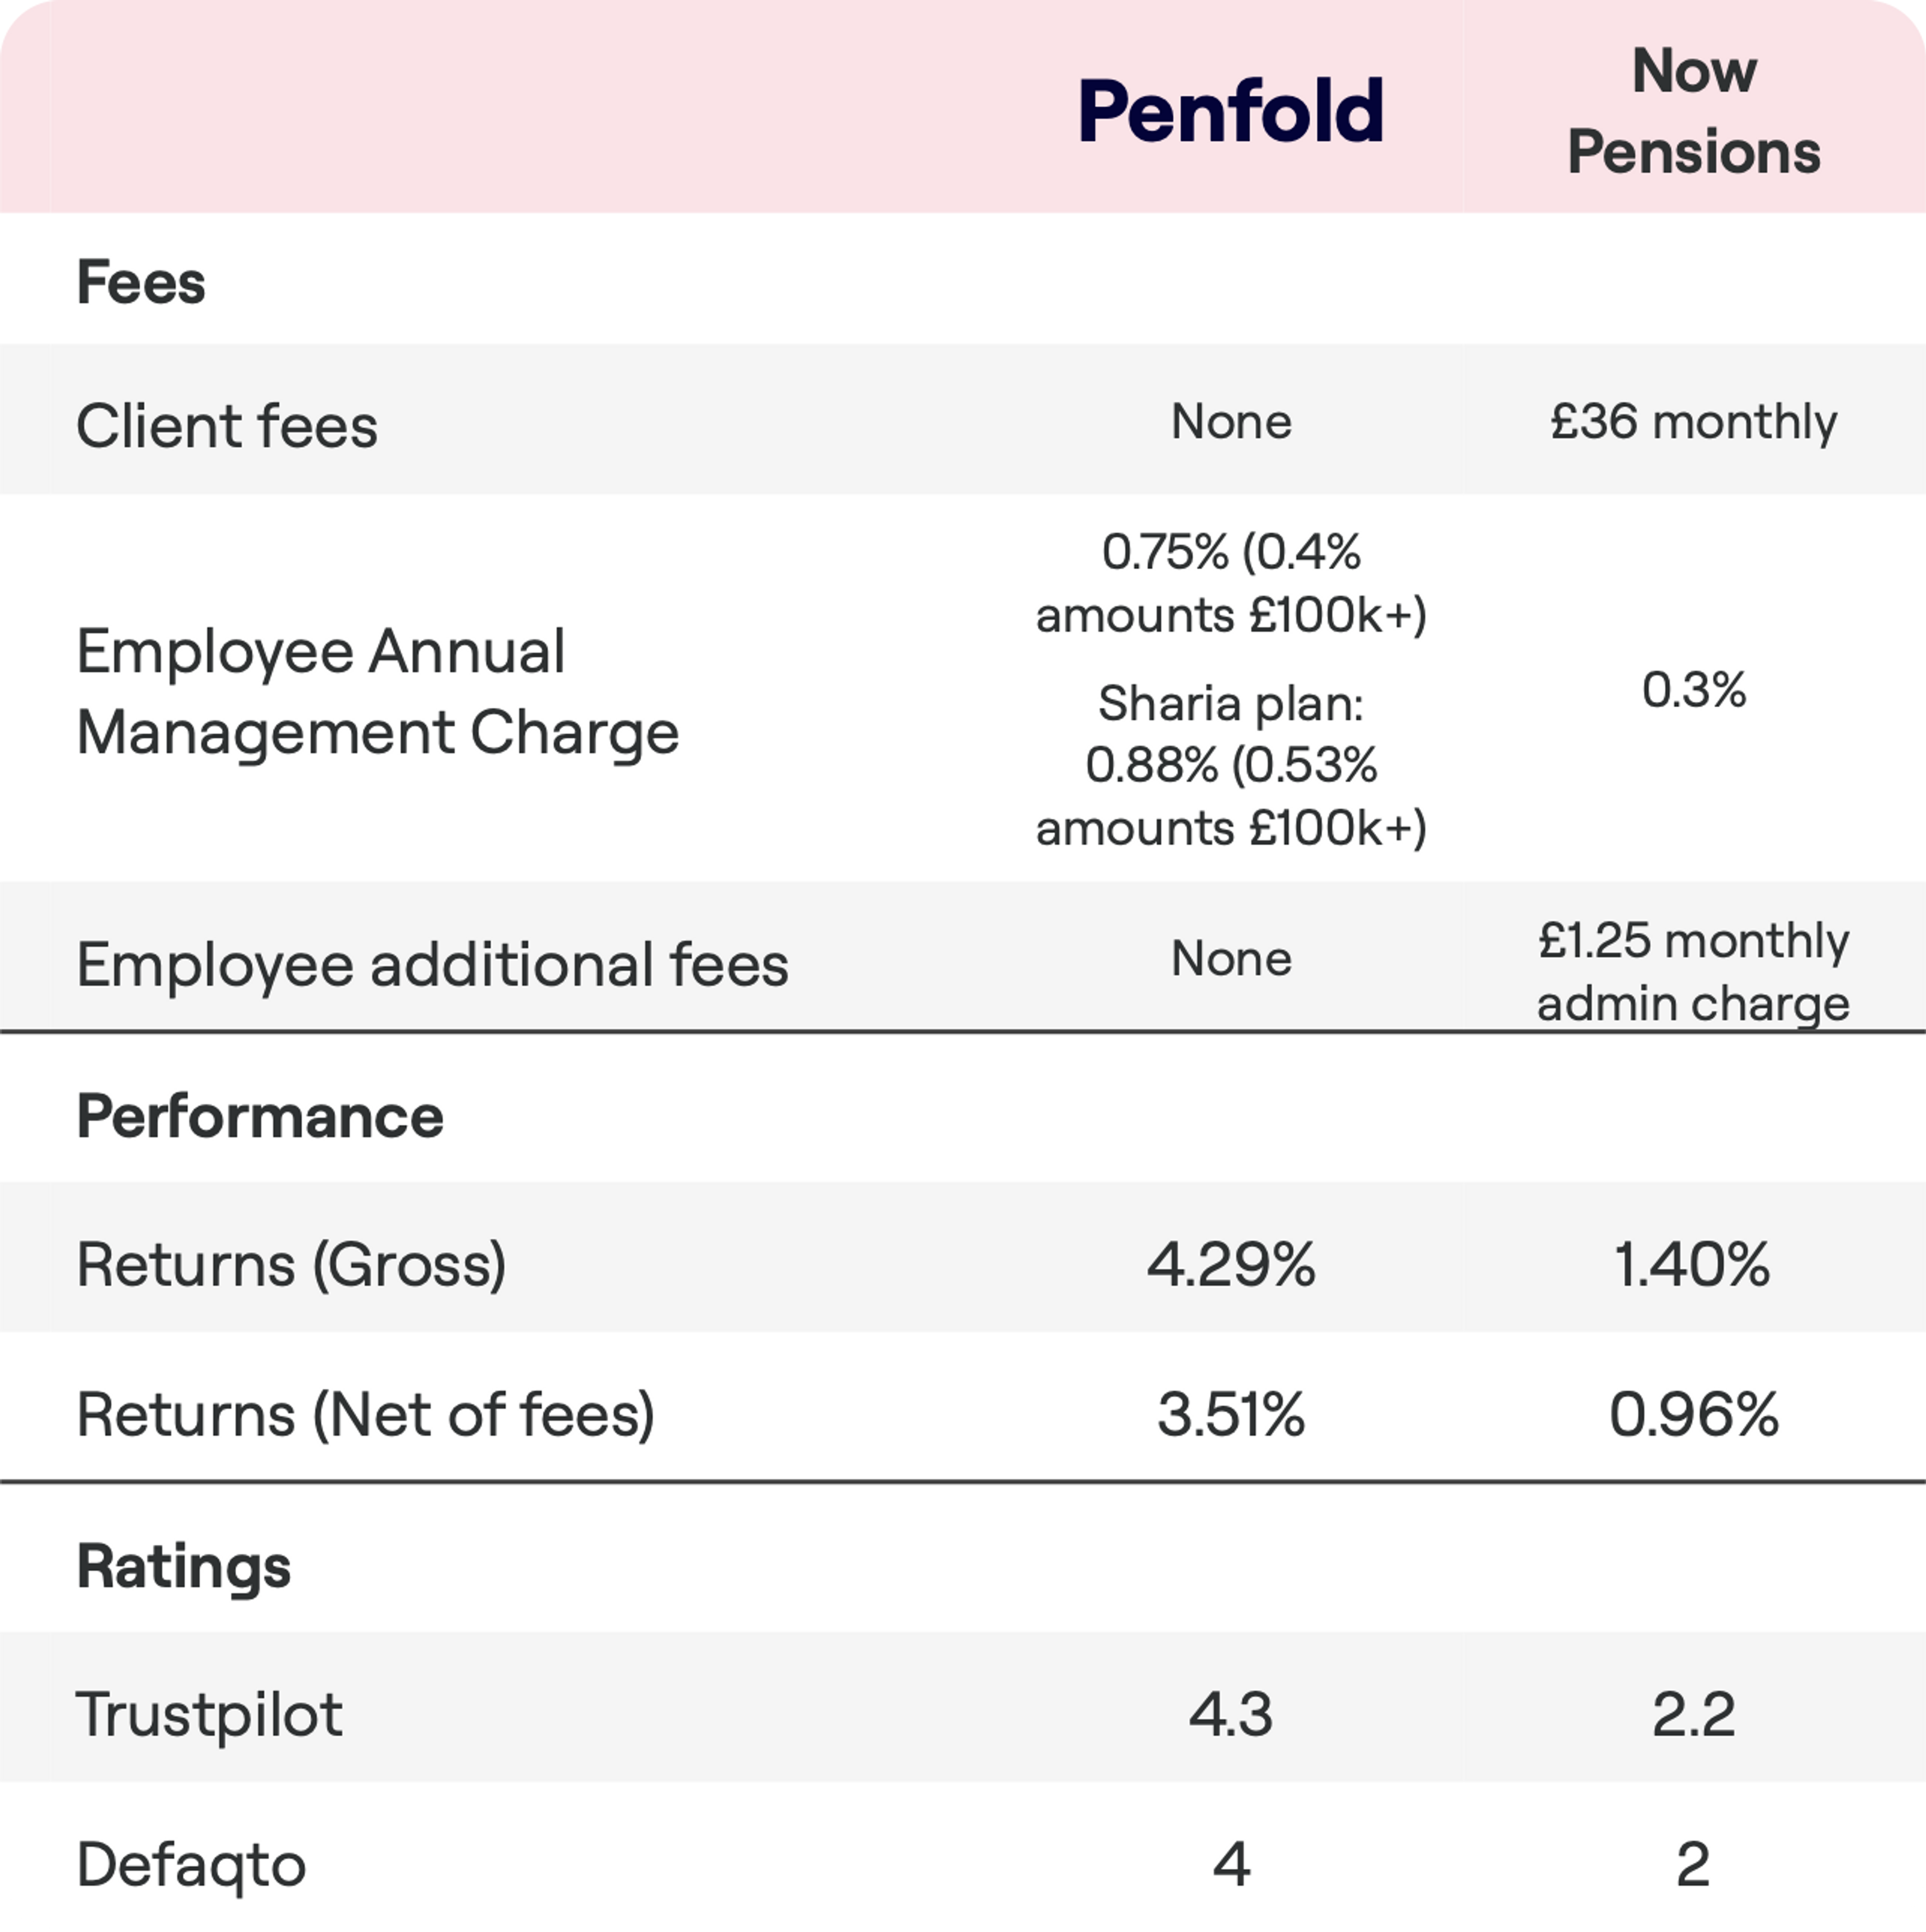 A fee and performance comparison chart between Penfold and Now Pensions. Penfold has no client fees and an Employee Annual Management Charge of 0.75% (reduced to 0.4% for amounts over £100k) with a Sharia plan at 0.88% (reduced to 0.53% for over £100k), while Now Pensions has a £36 monthly client fee and a 0.3% charge with an additional £1.25 monthly admin fee. Penfold has a gross return of 4.29% and a net return of 3.51%, compared to Now Pensions' 1.40% gross and 0.96% net. Trustpilot rates Penfold at 4.3 and Now Pensions at 2.2, with Defaqto scores of 4 for Penfold and 2 for Now Pensions.